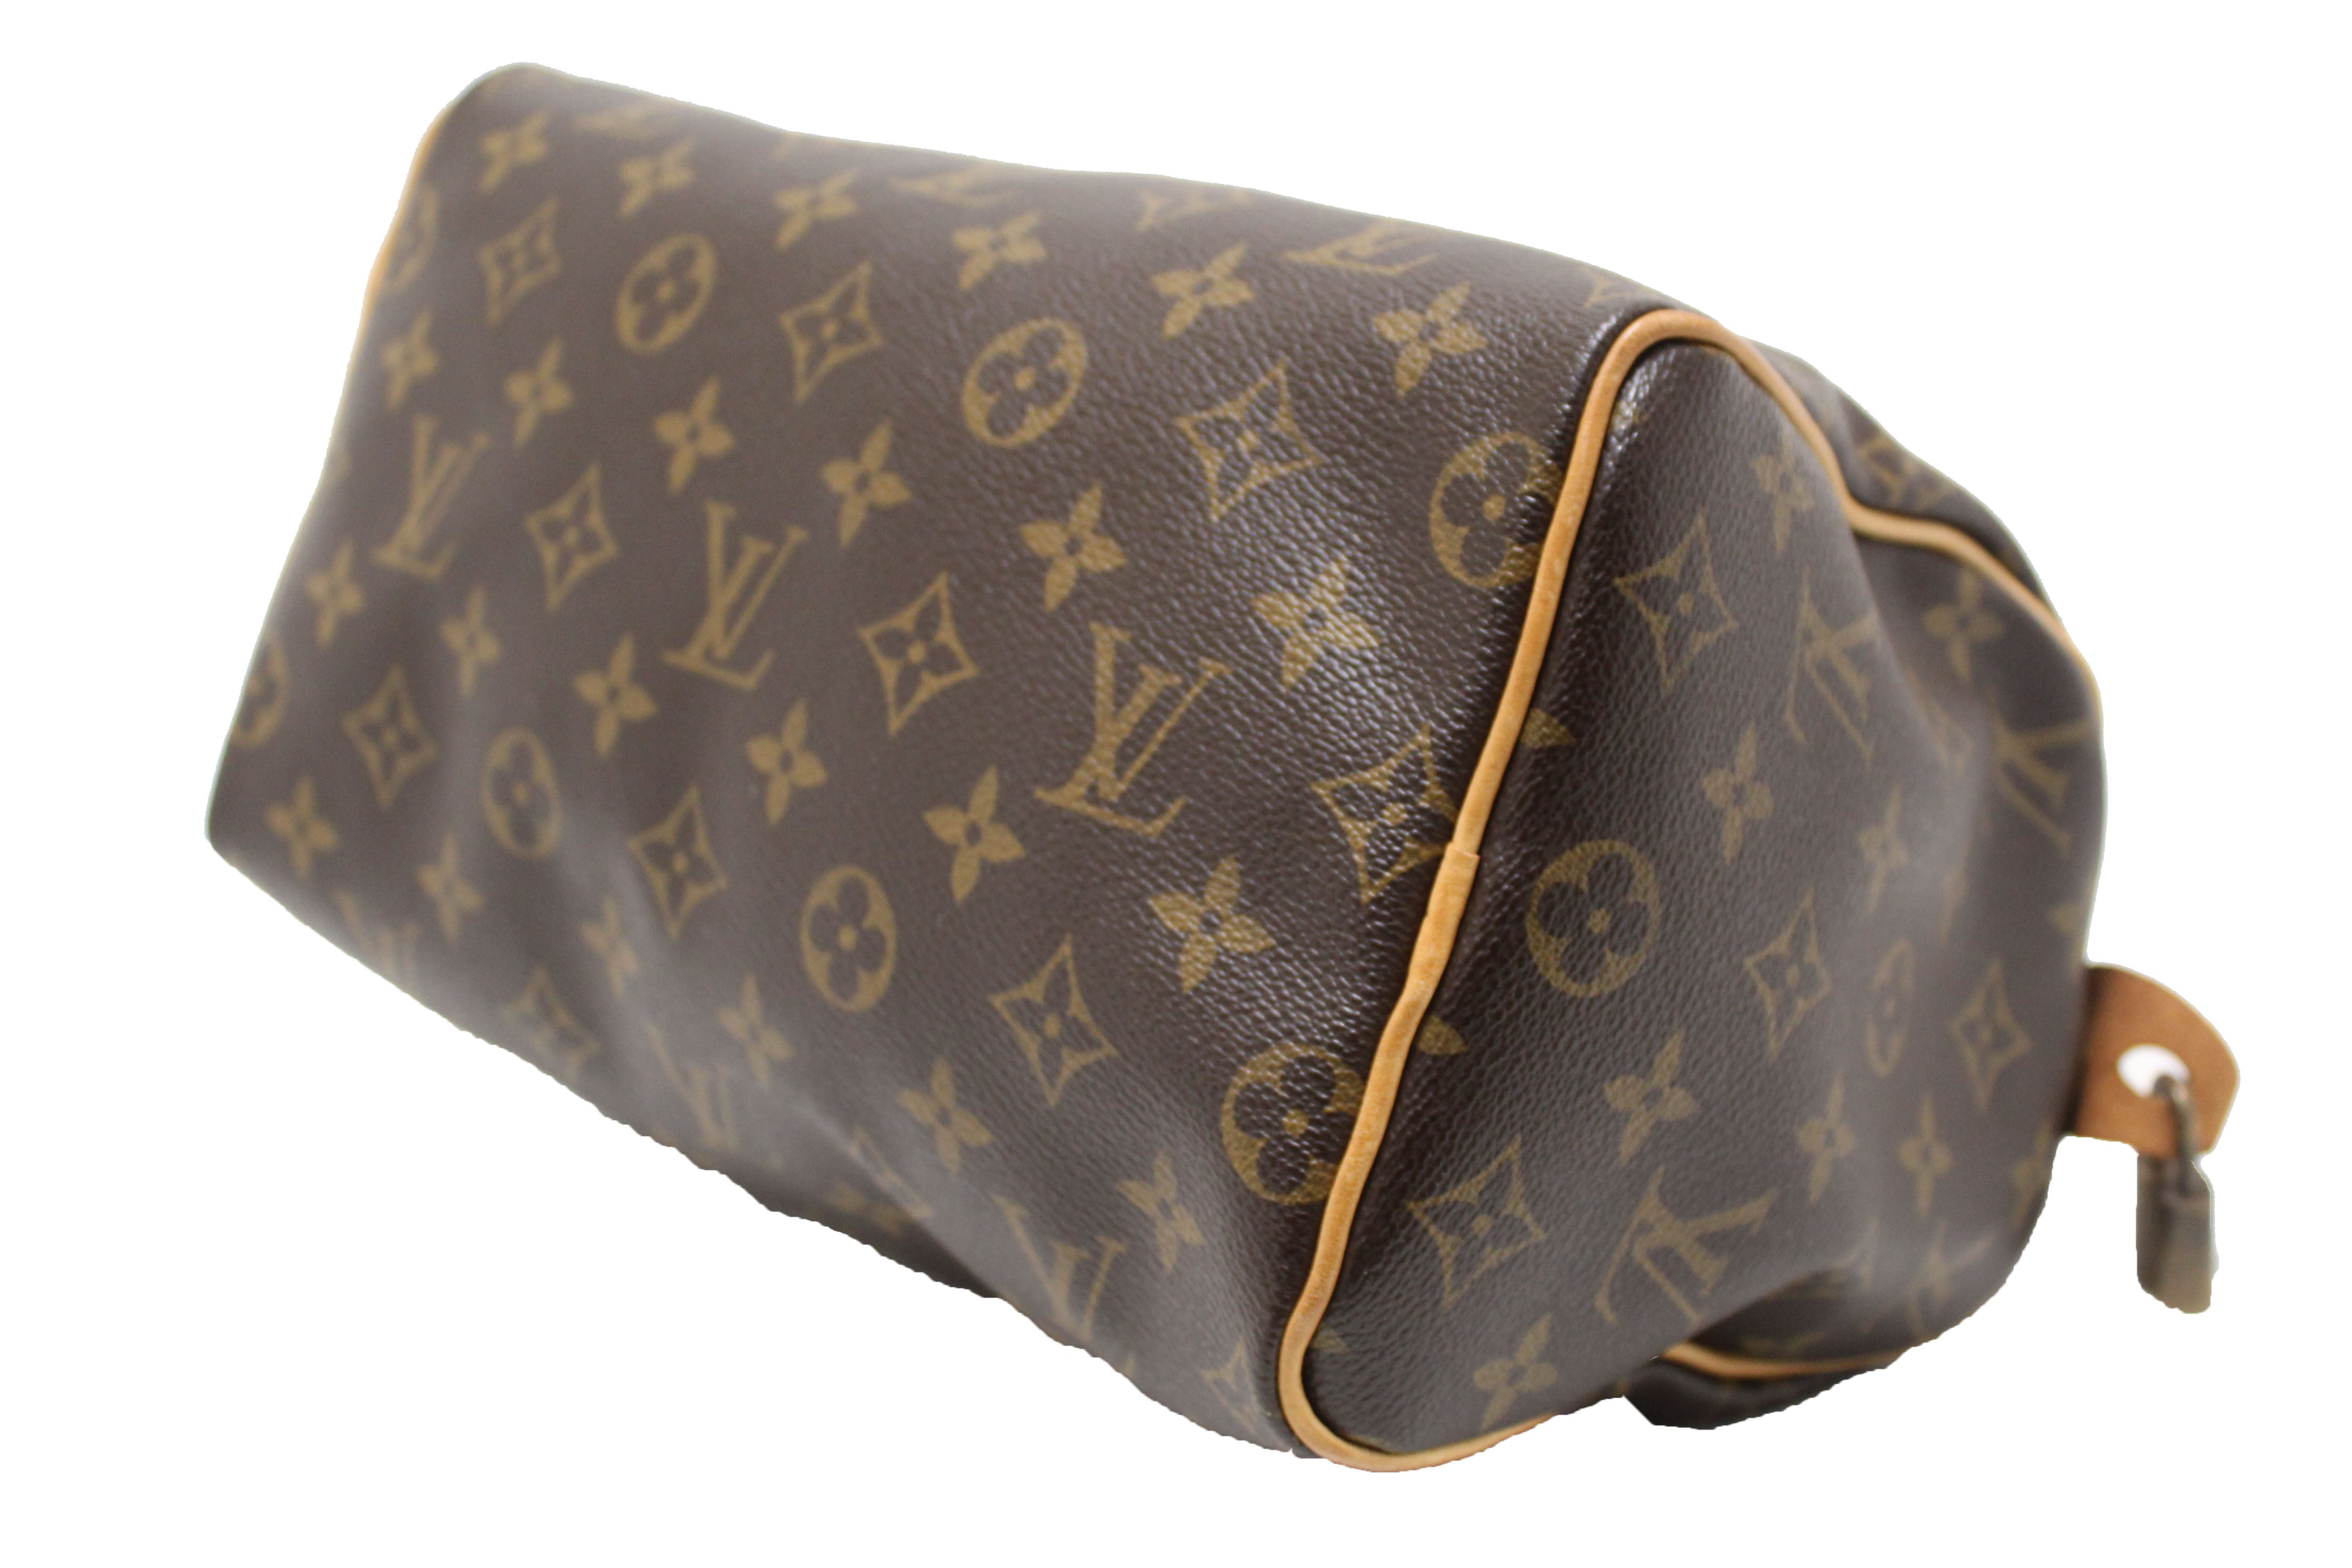 Authentic LV Speedy 25: Discounted 205112/1